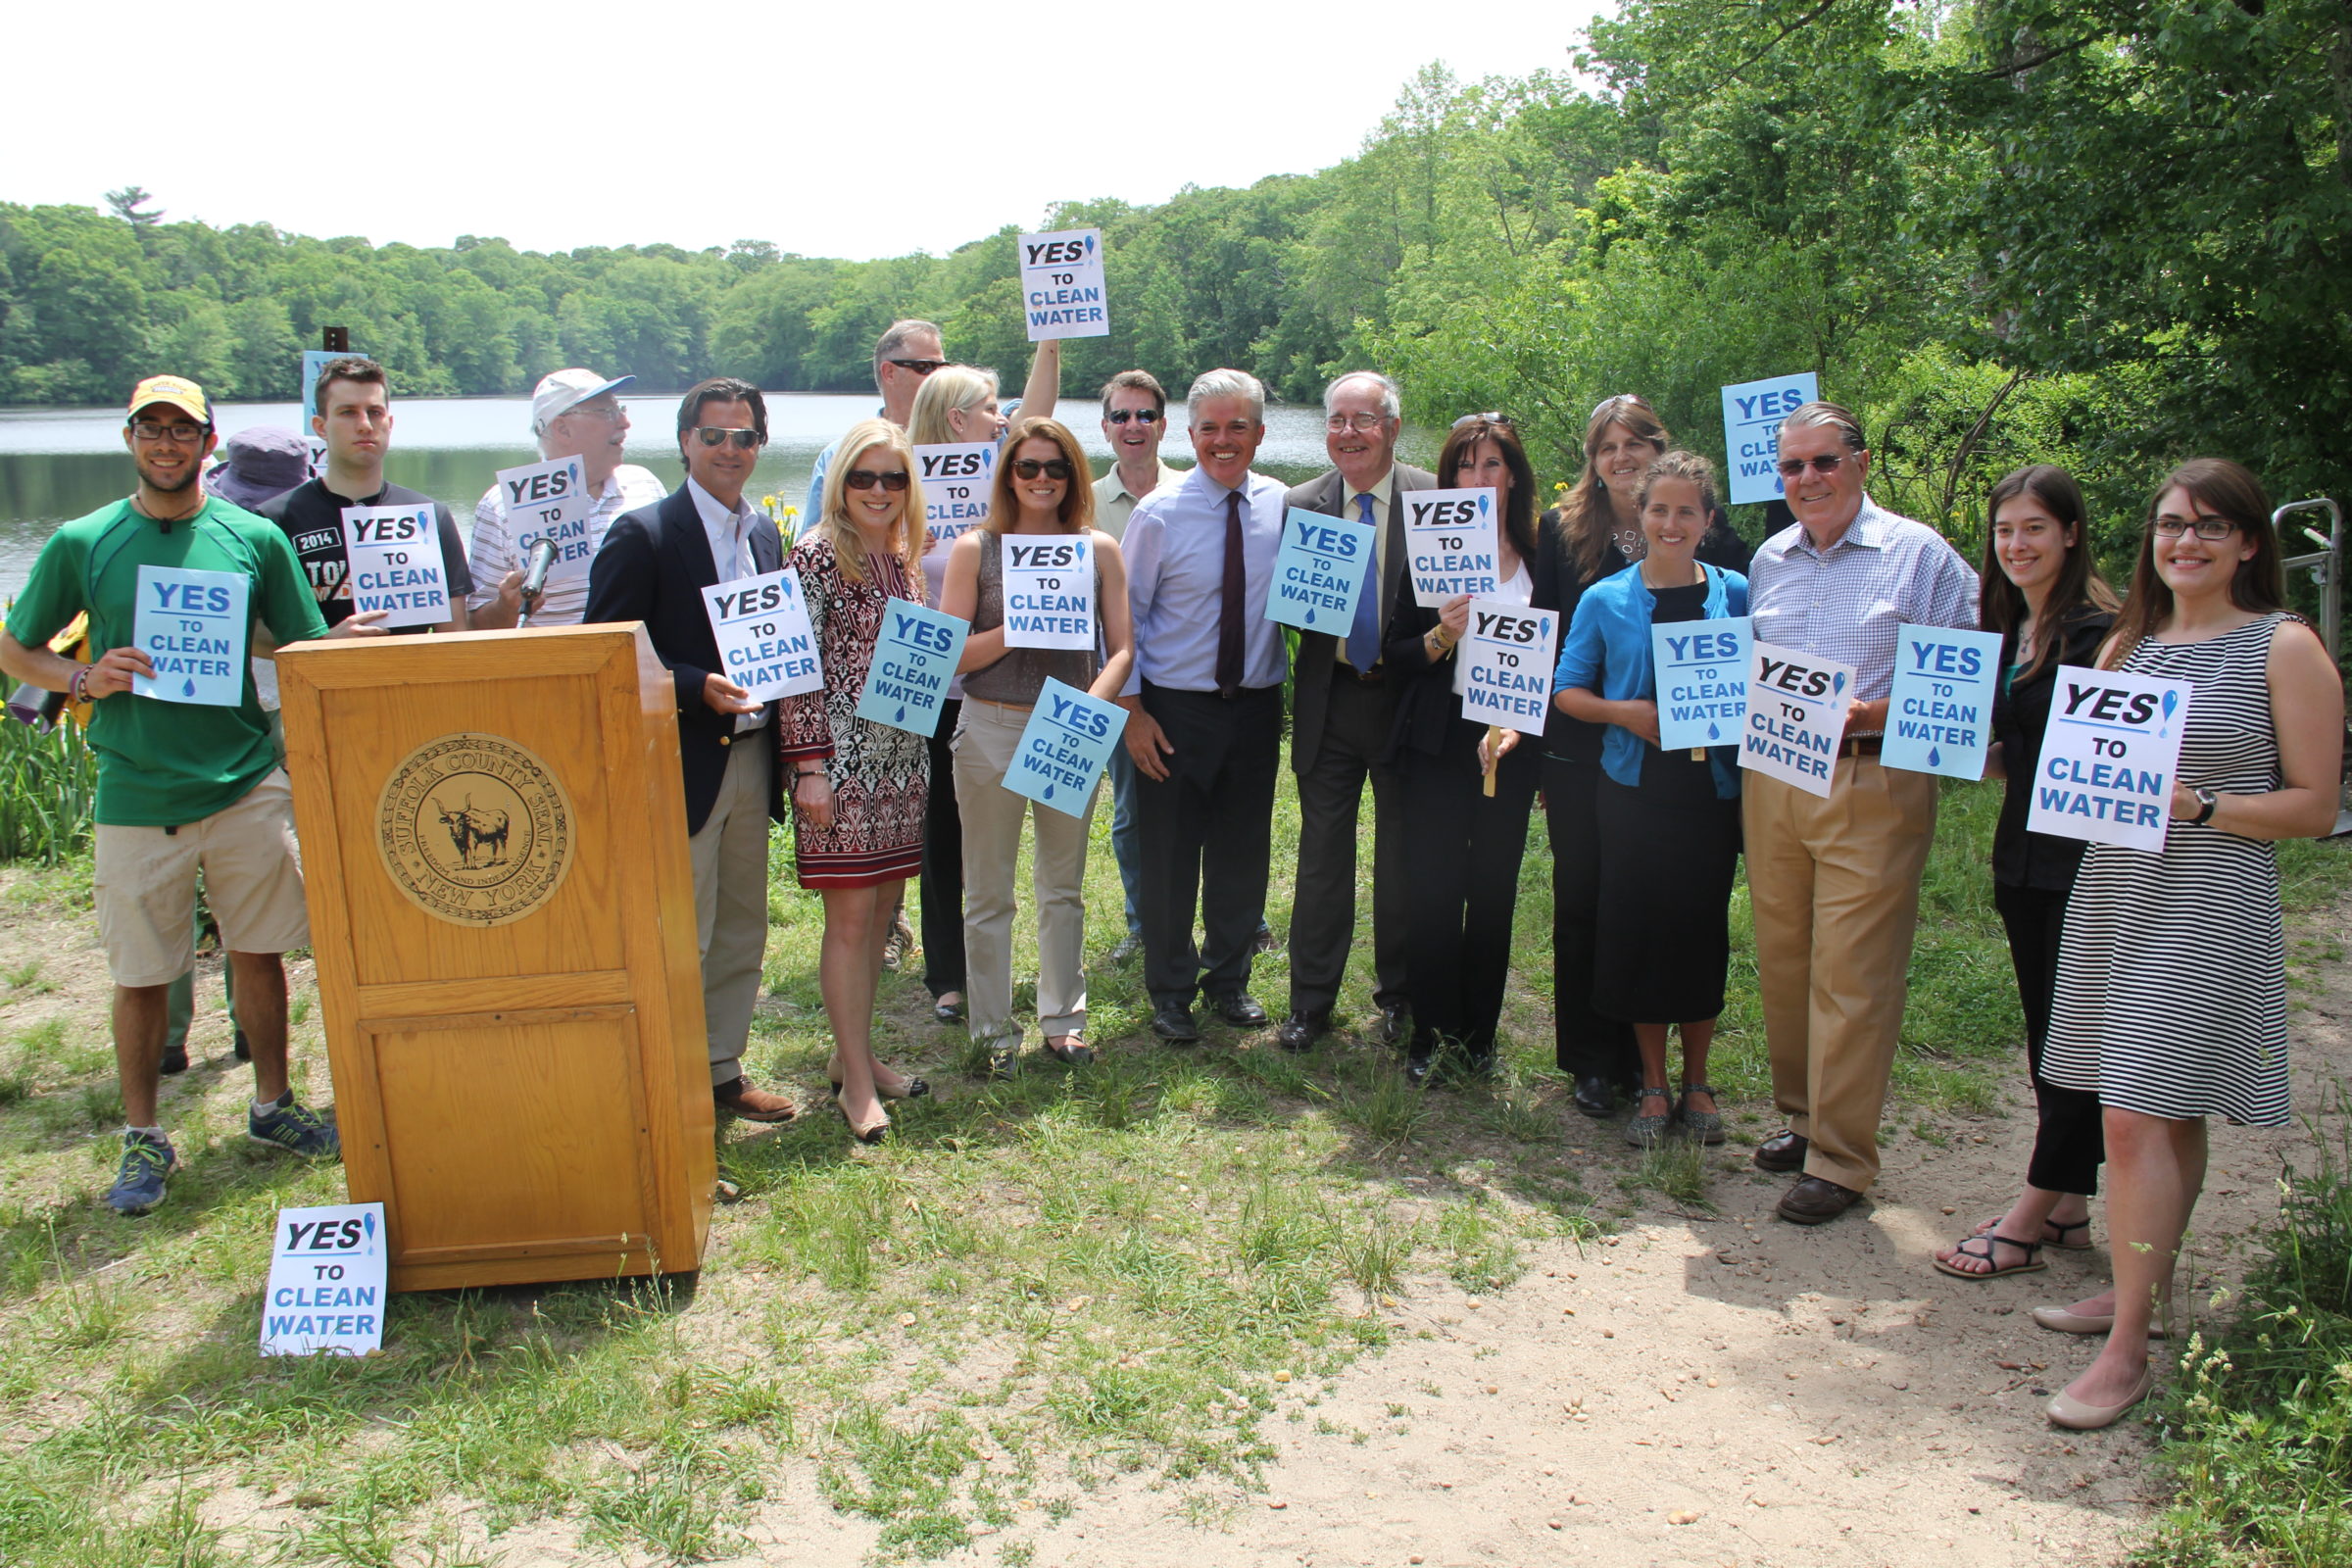 Press Conference on protecting Long Island Water Quality